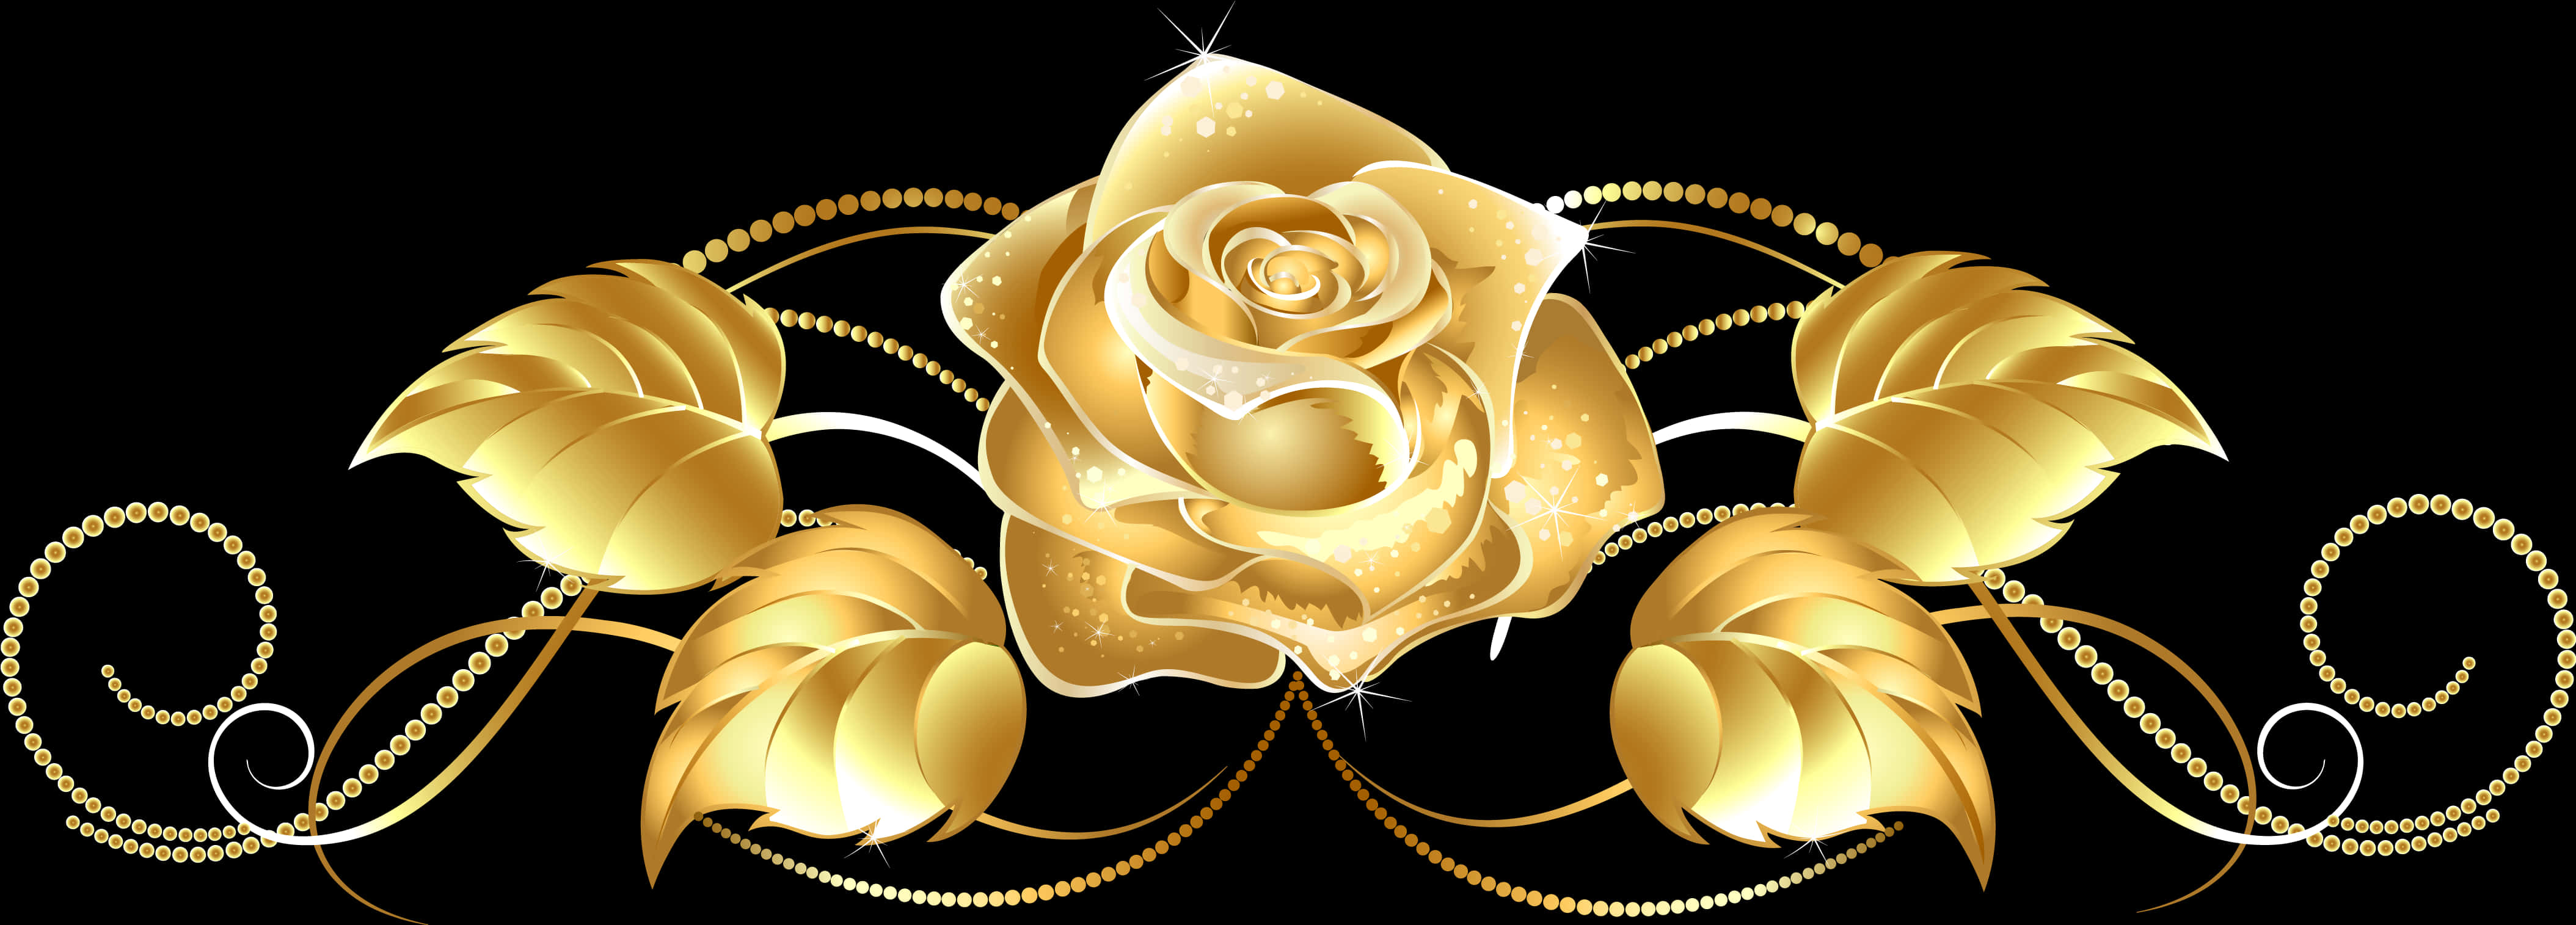 A Gold Rose With Beads